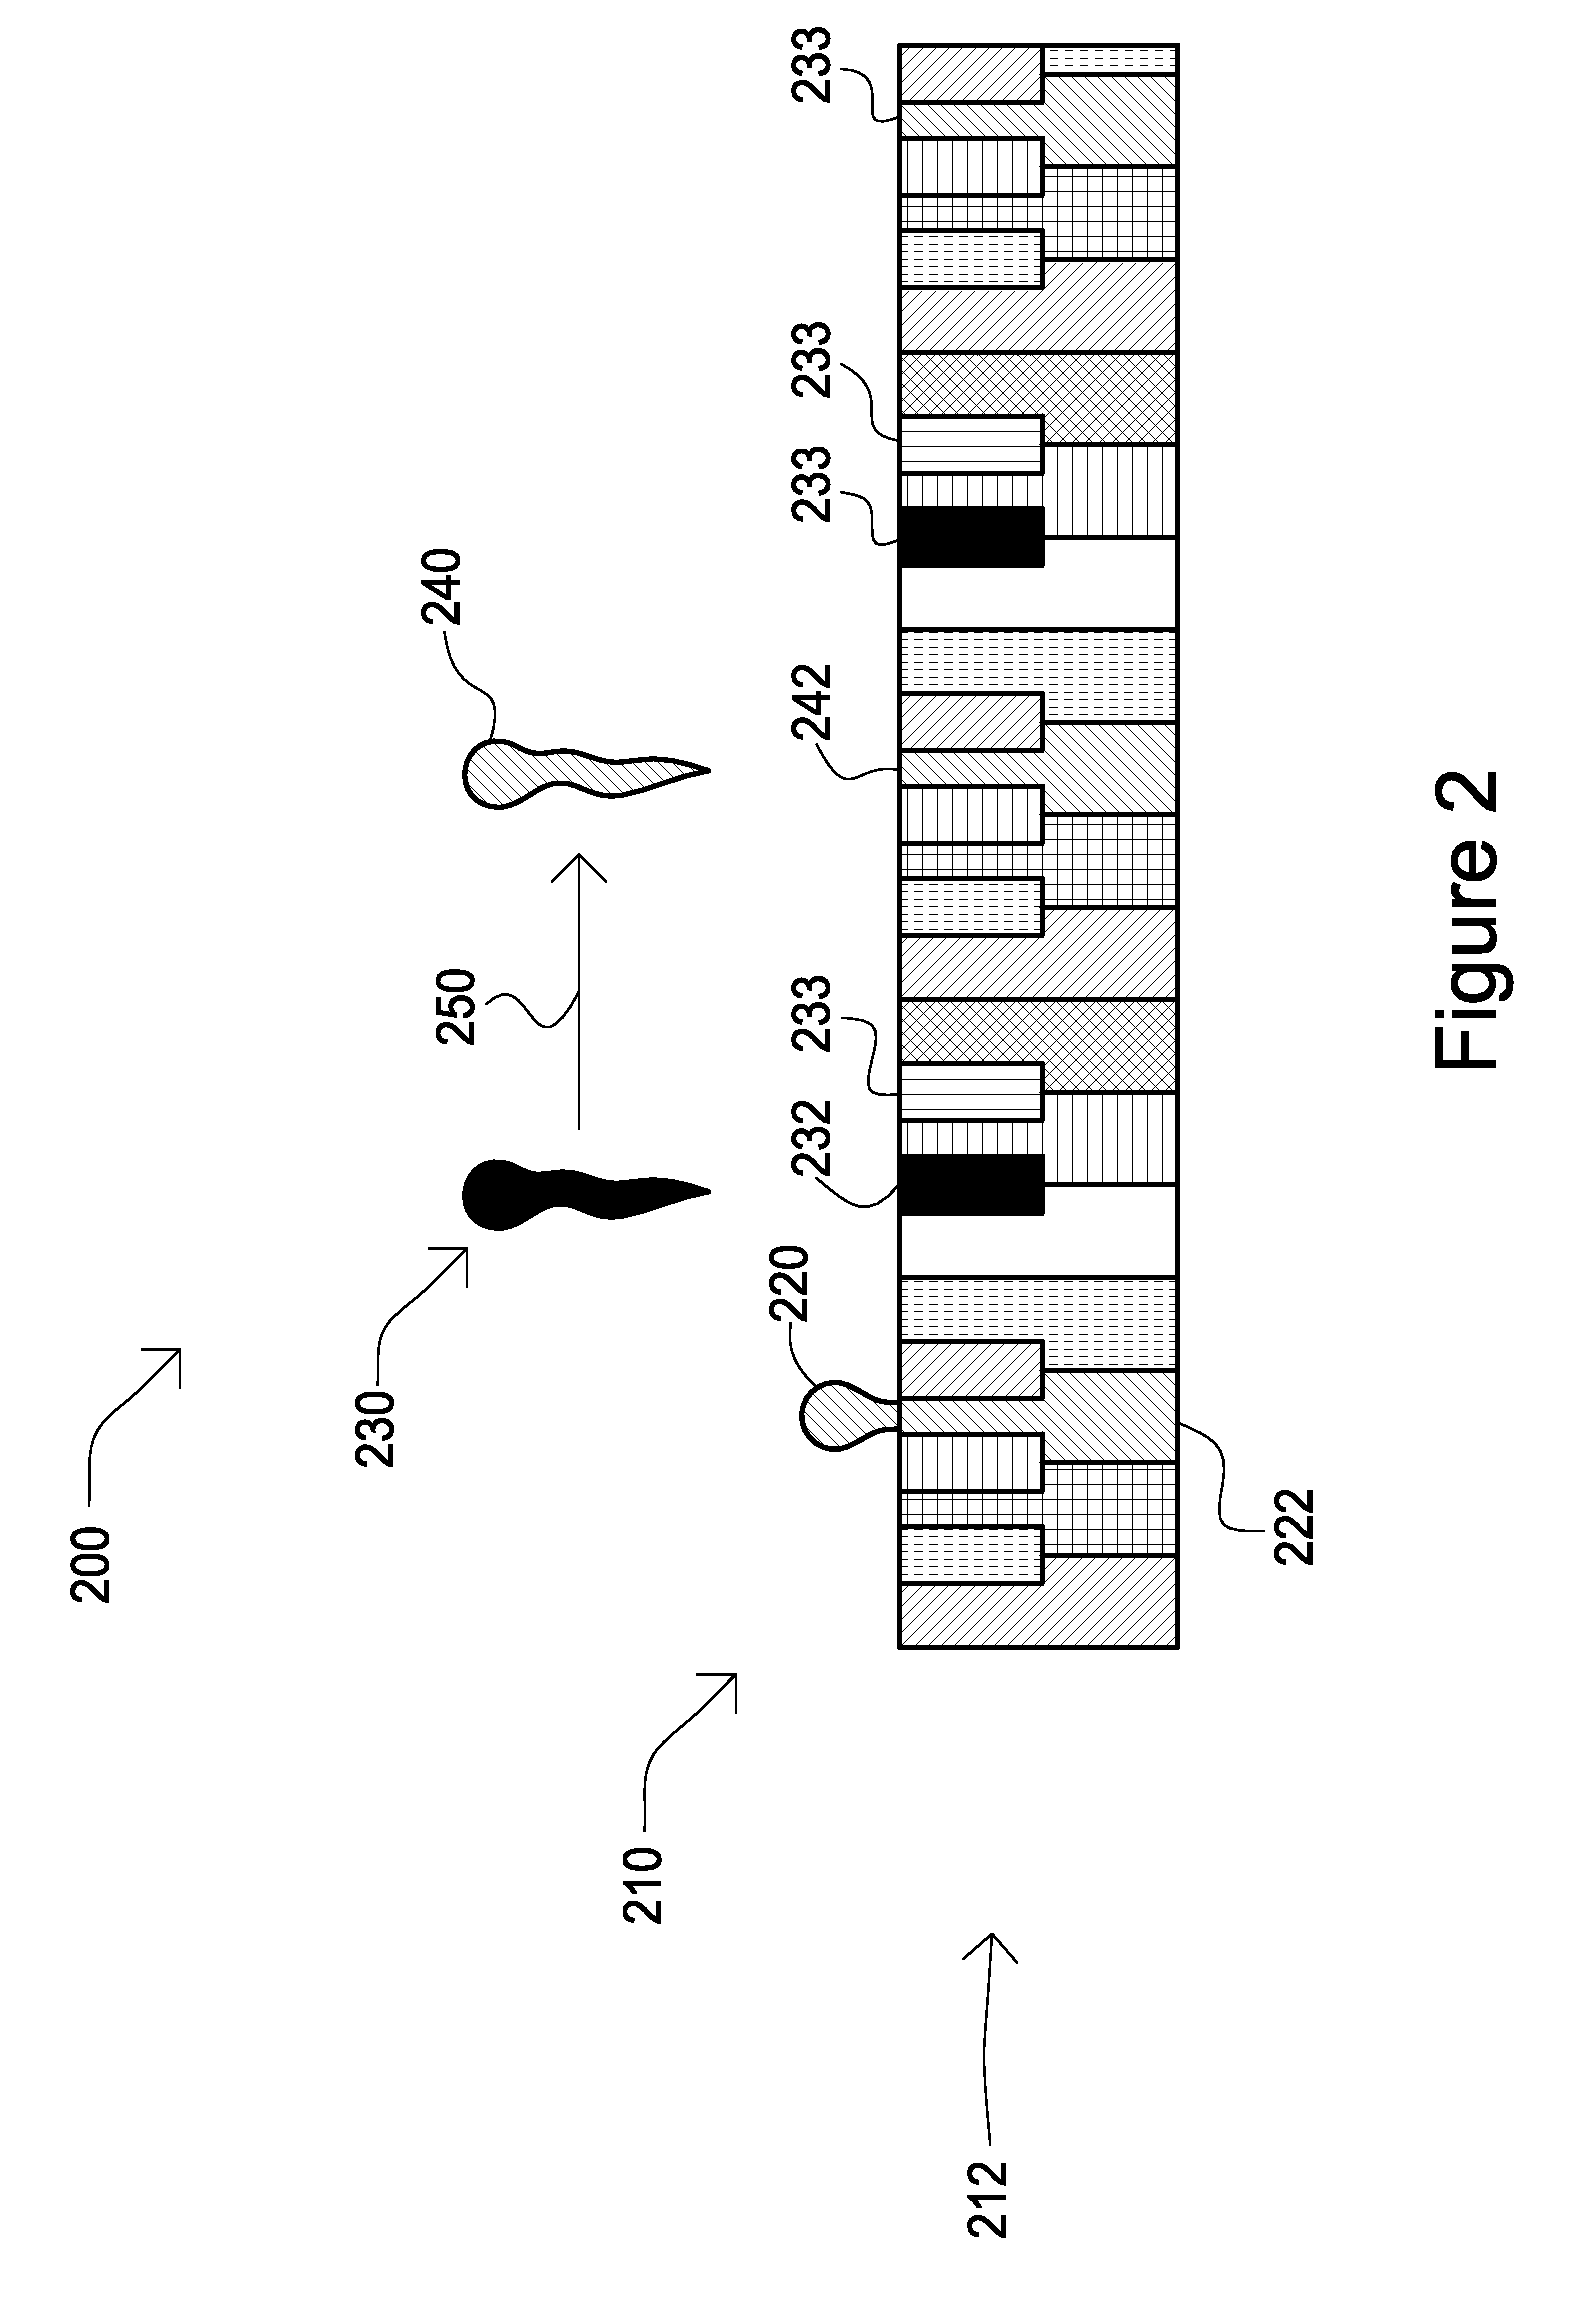 Music composition system and method